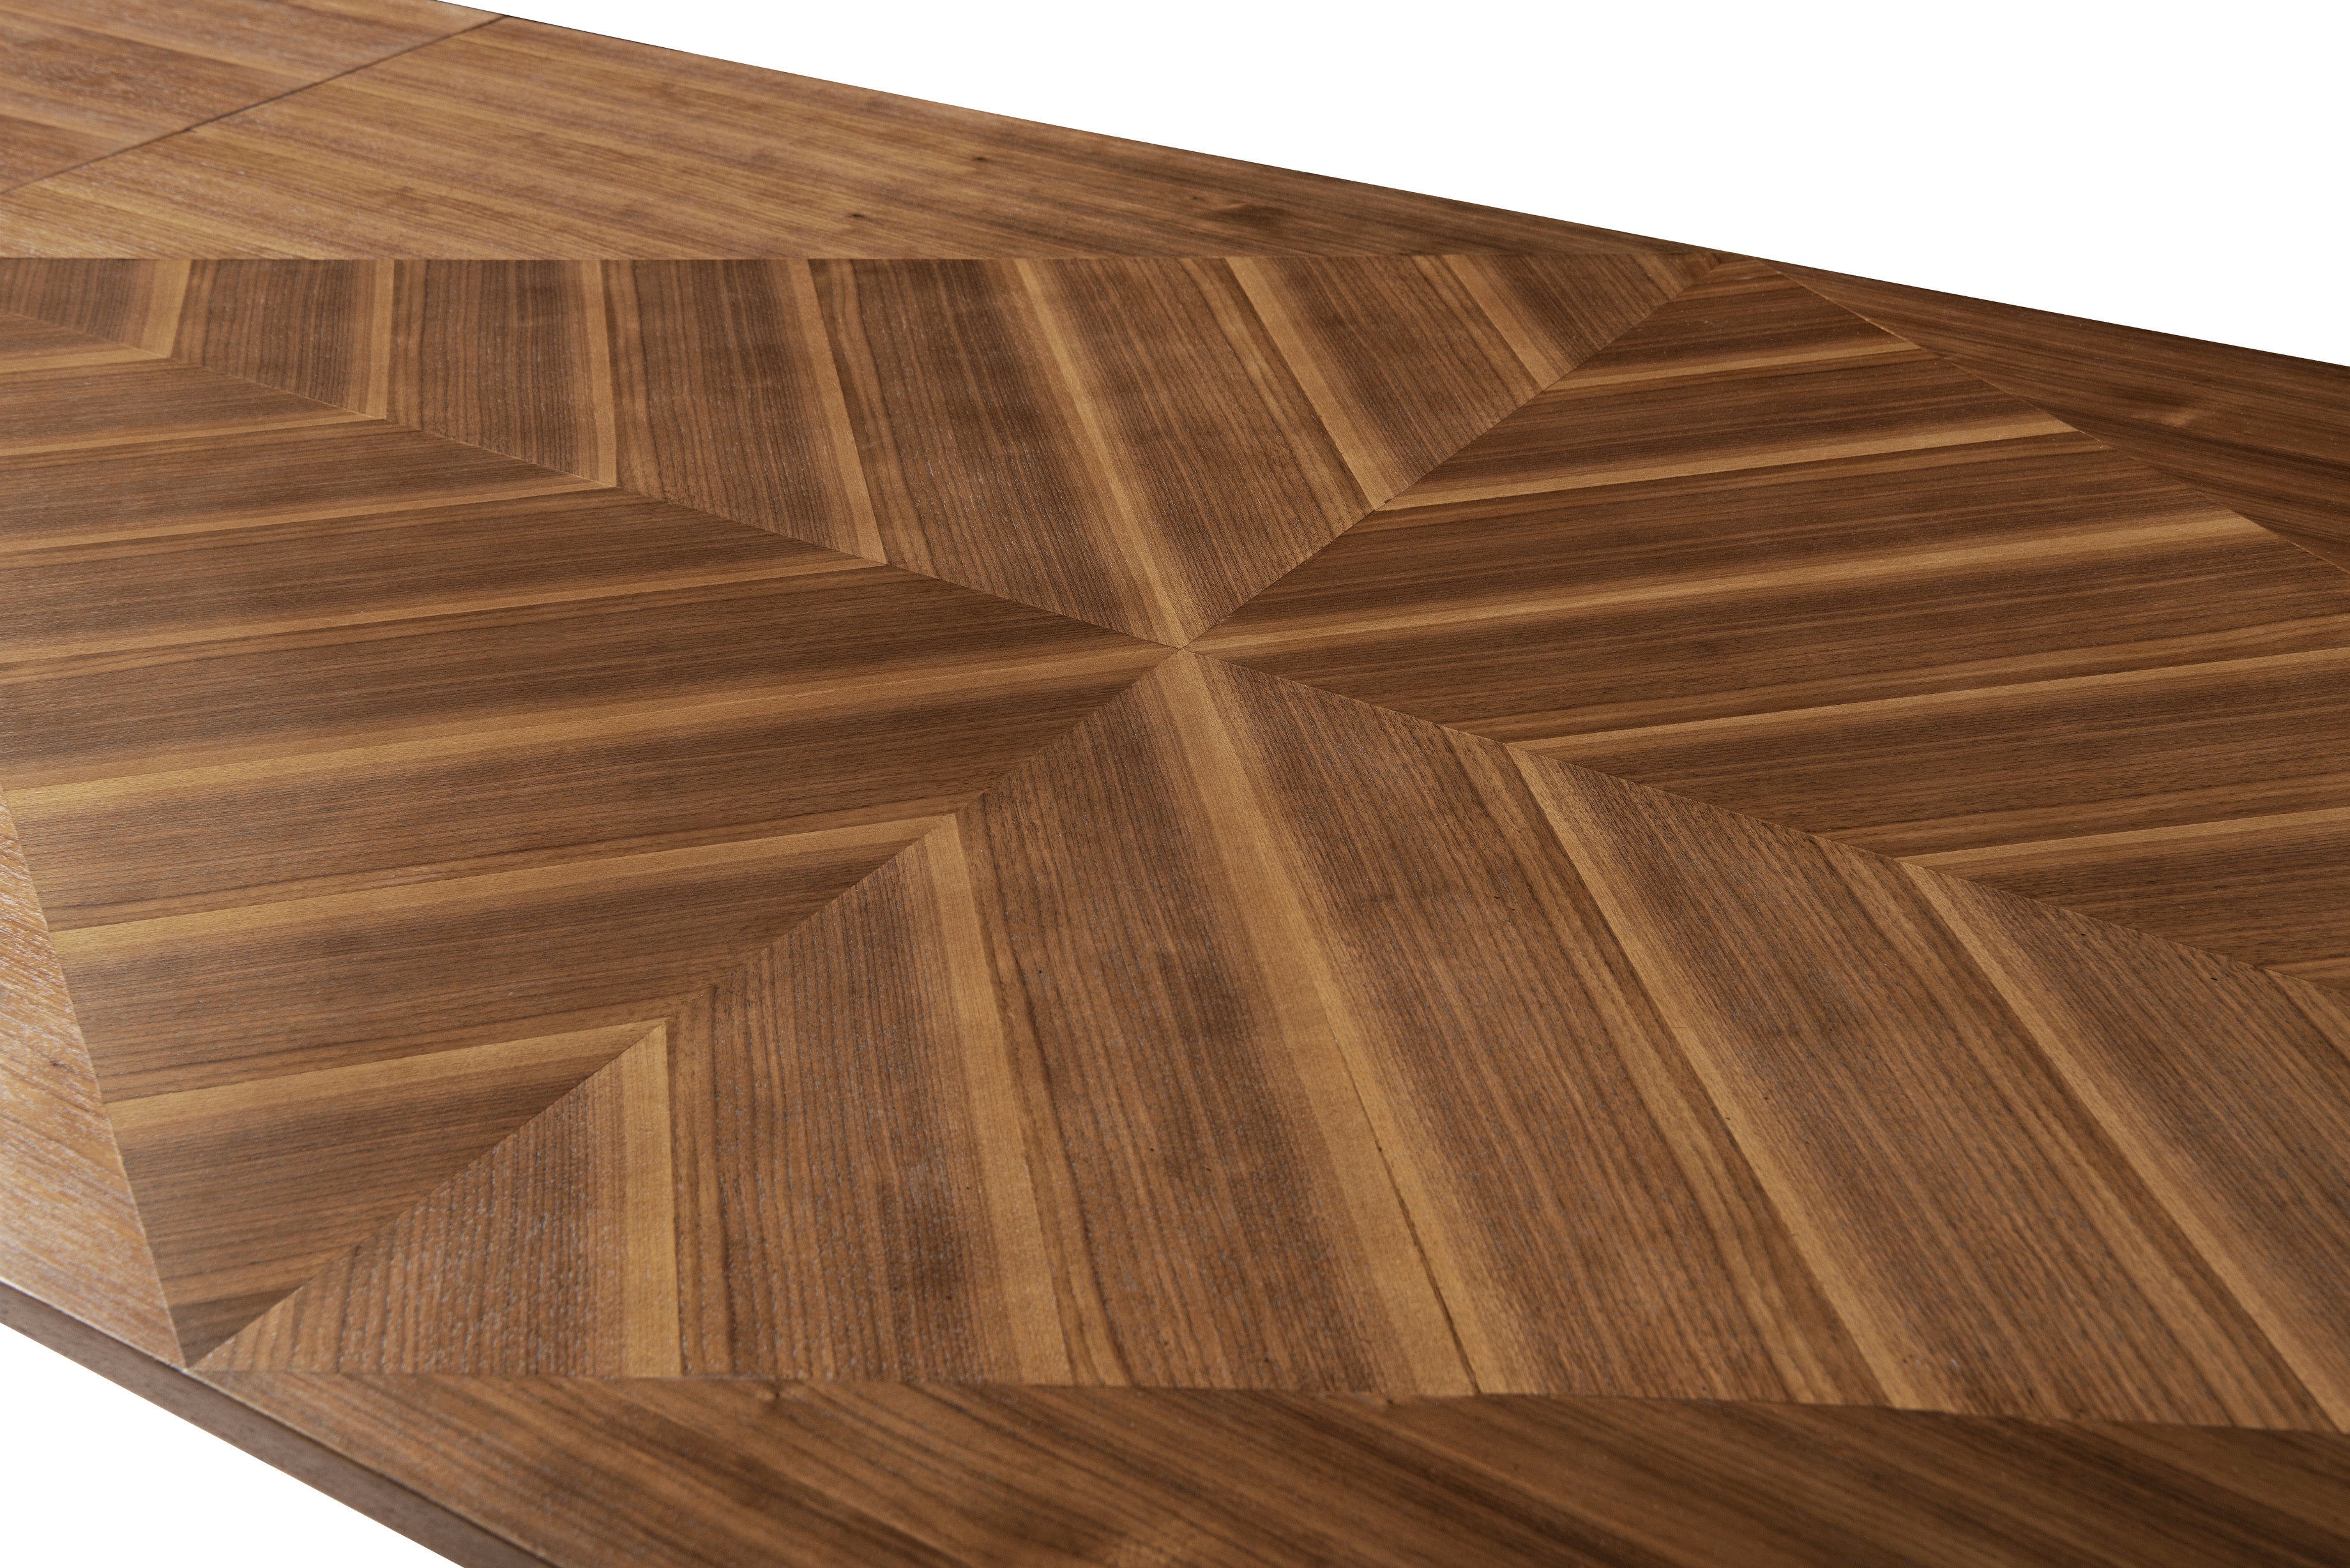 SHERES "Angles" Dining Table Walnut